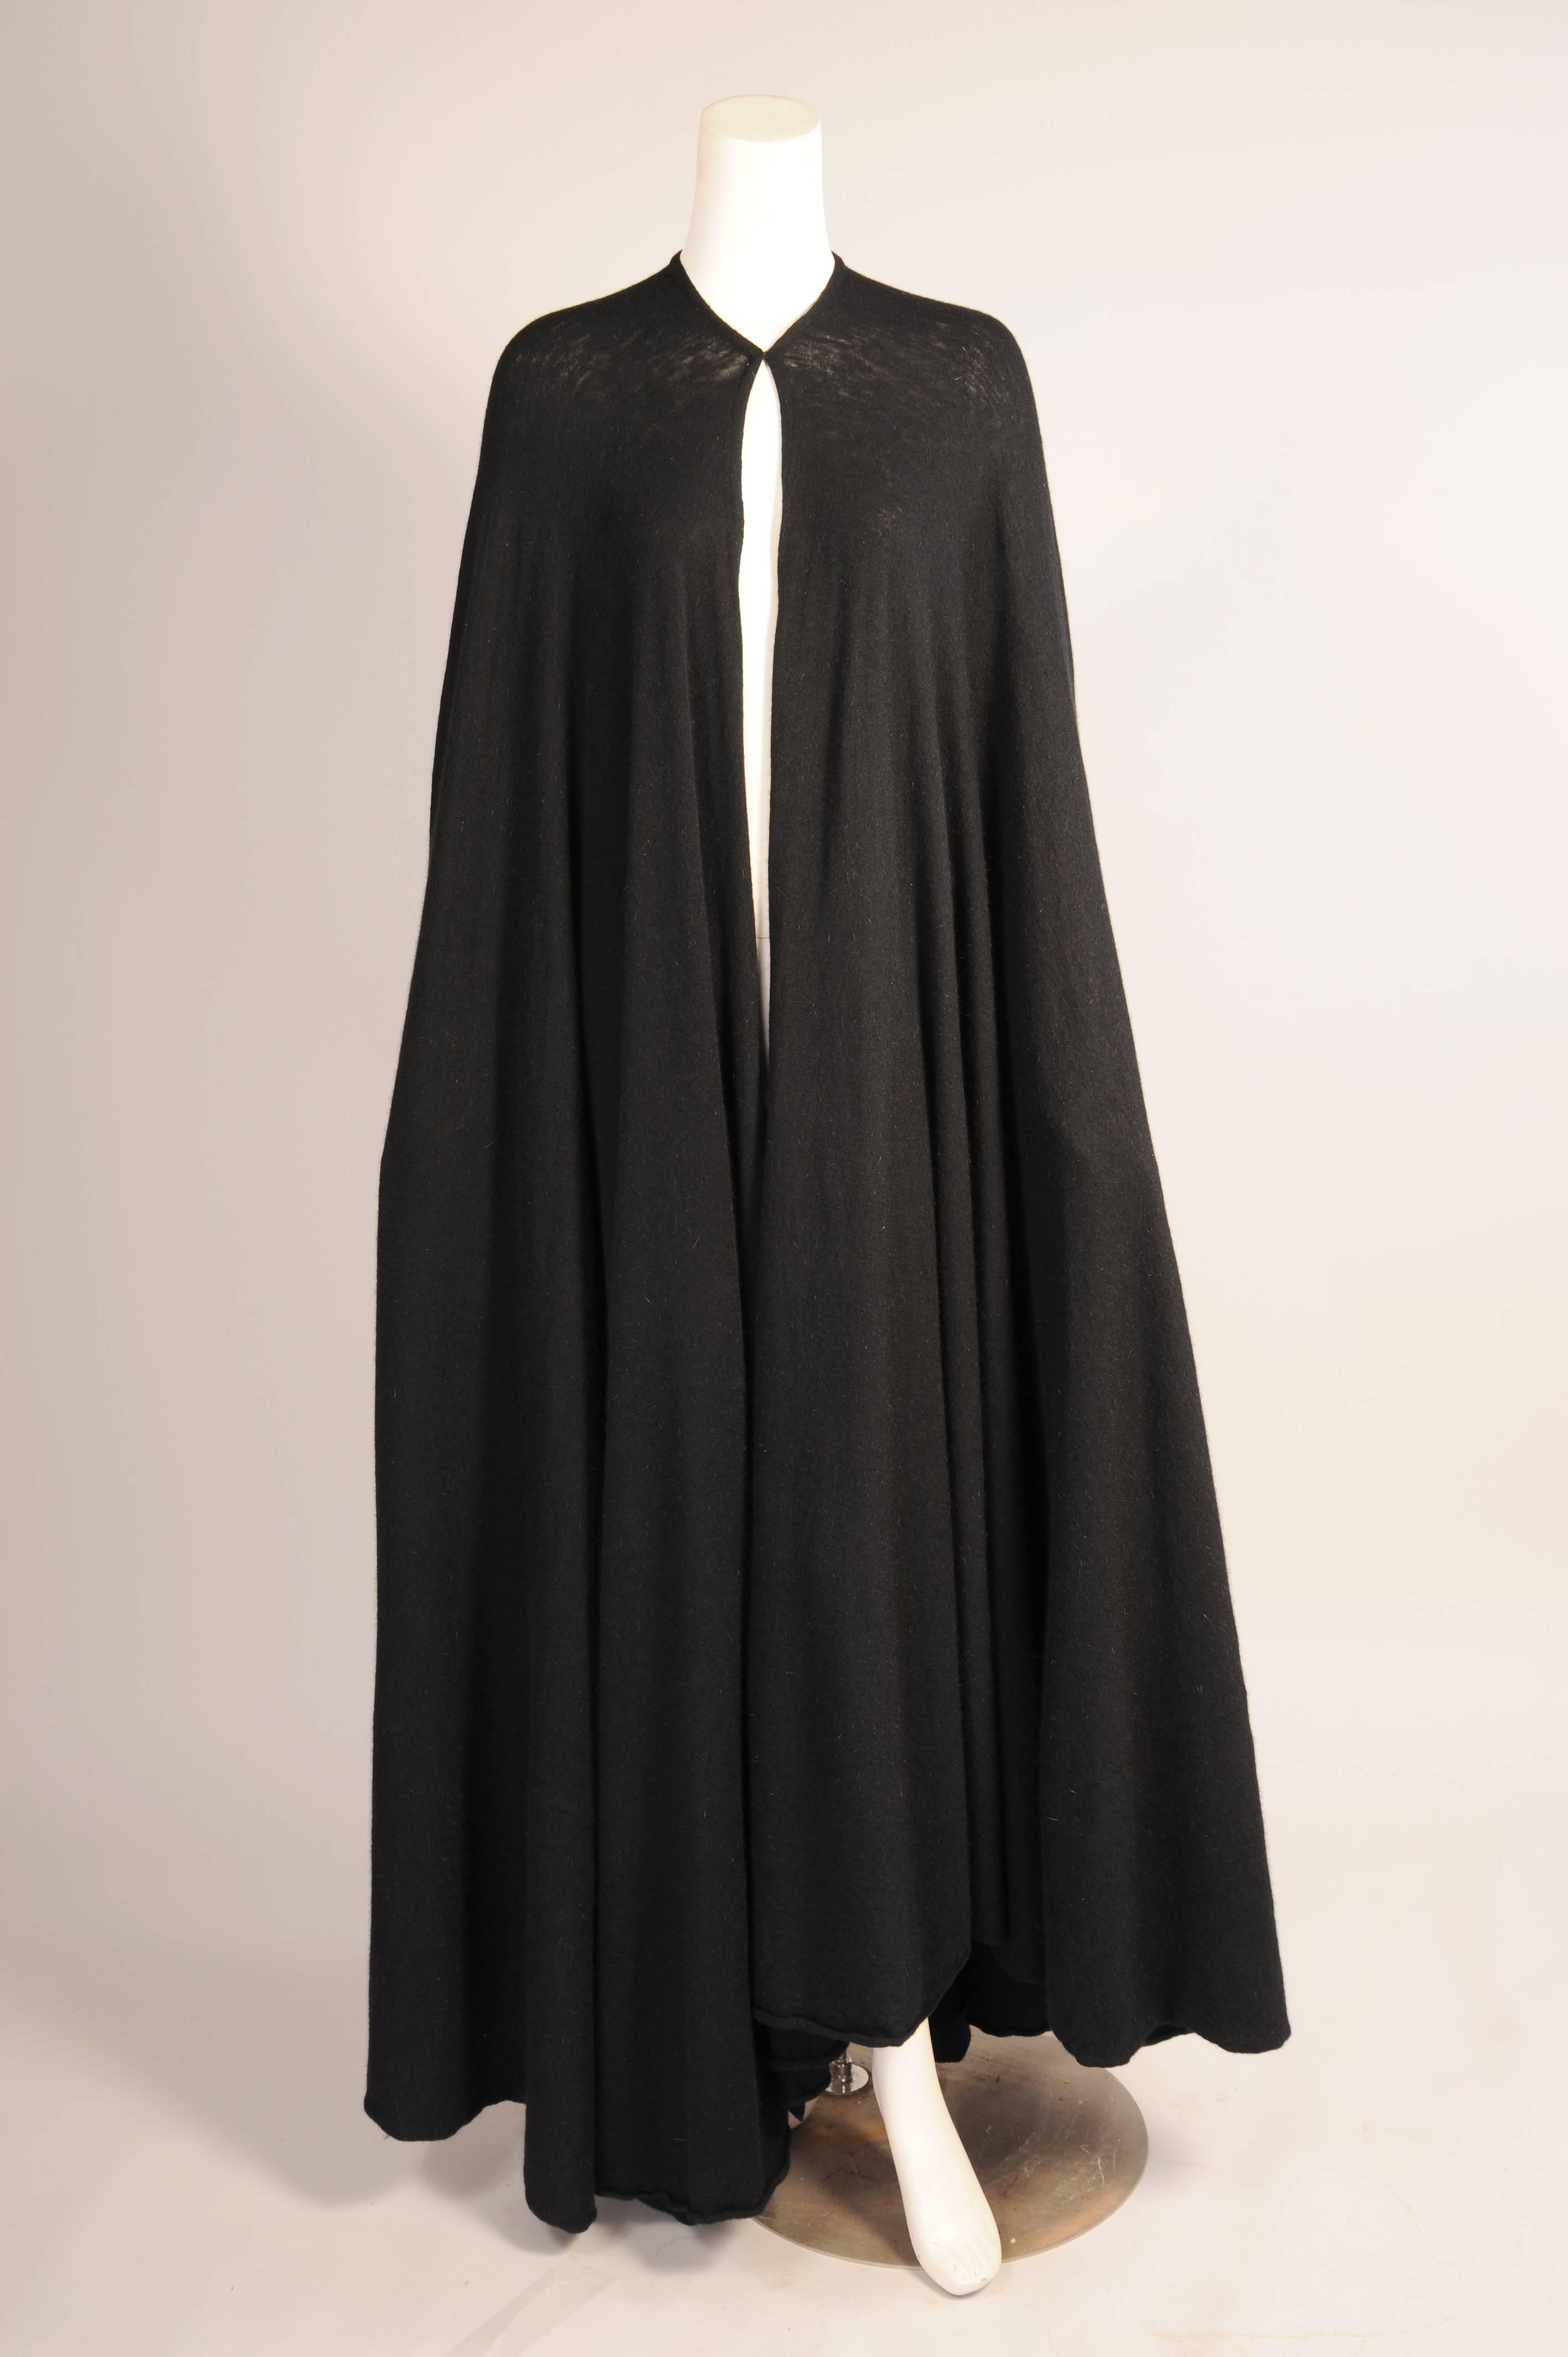 Madame Gres is famous for her draping and this fluid black wool jersey cape is a spectacular example of her work. The cape is made from a luxuriously soft fabric and it has a single hook and fabric eye closure and only three seams. It drapes and